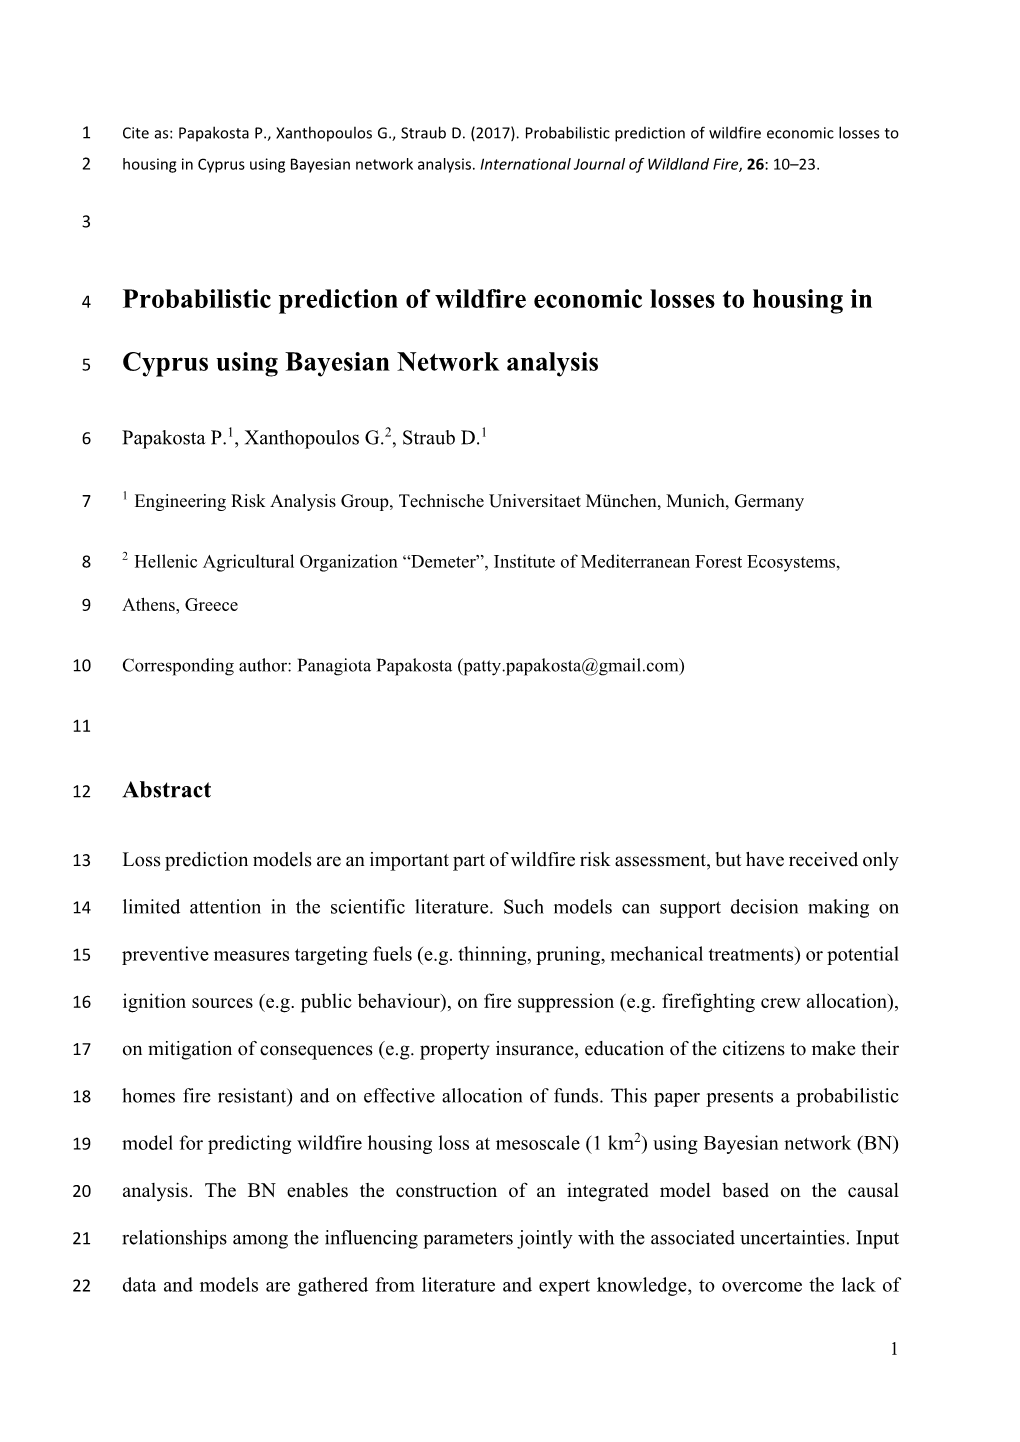 Probabilistic Prediction of Wildfire Economic Losses to 2 Housing in Cyprus Using Bayesian Network Analysis